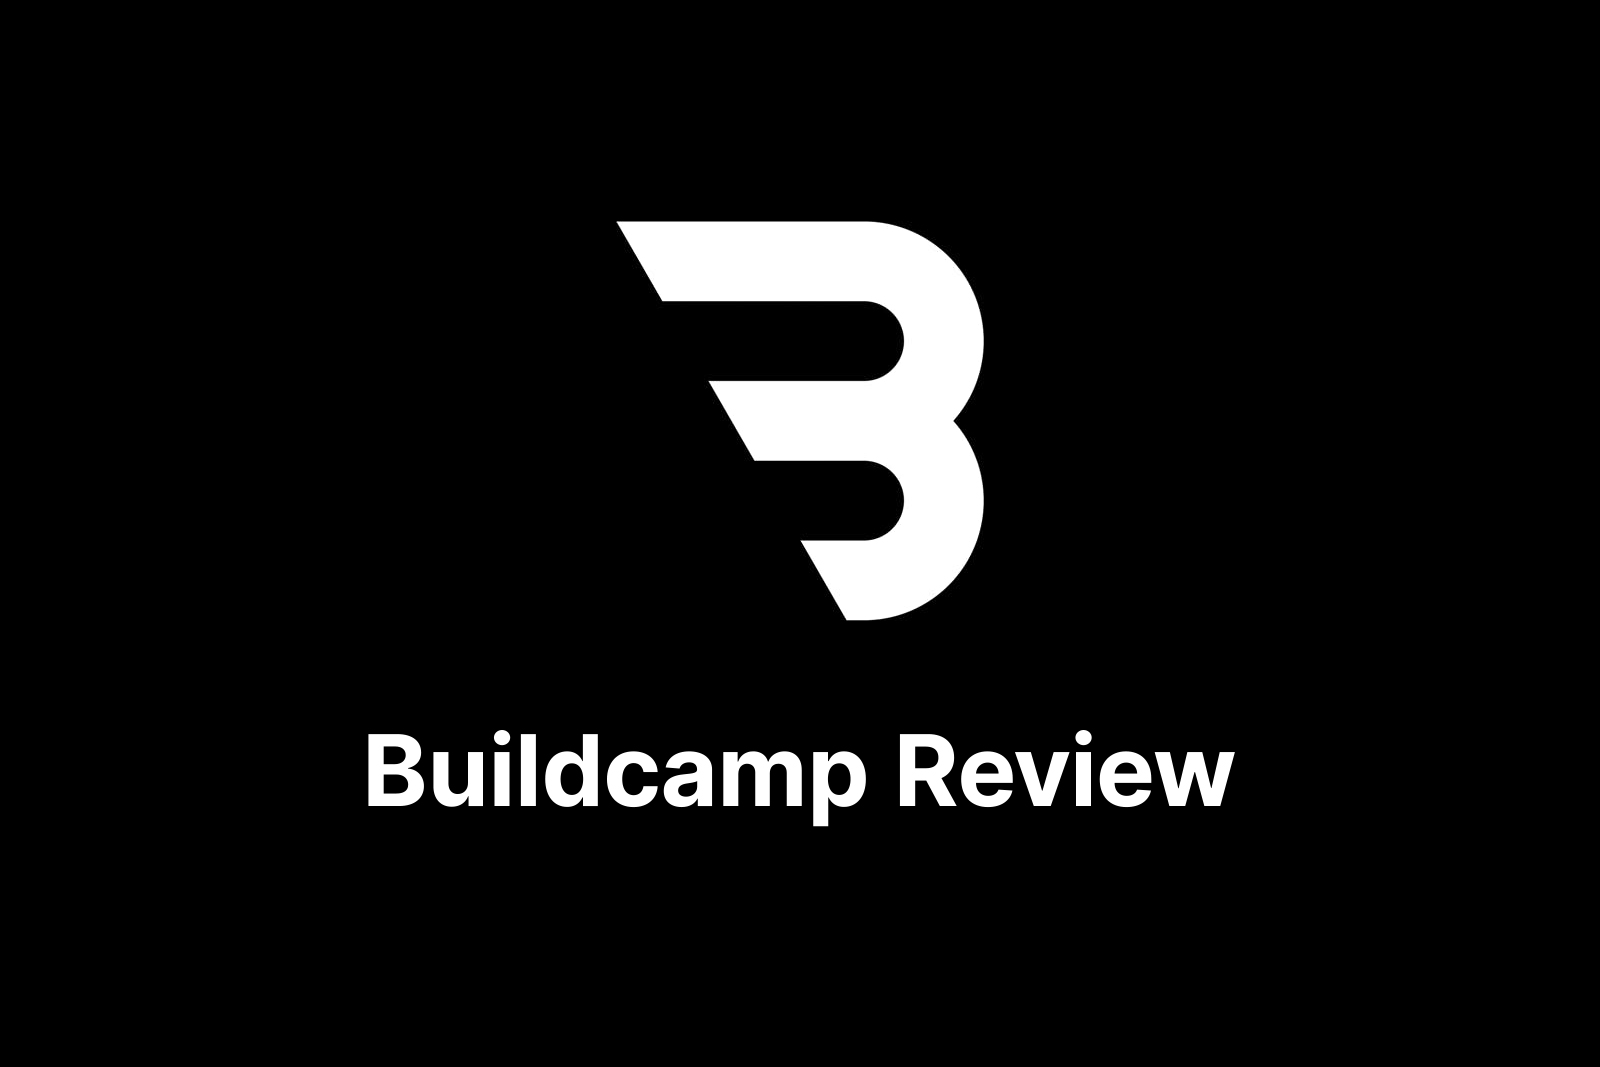 Buildcamp.io Review: An In-Depth Look at the Intensive Bubble.io Bootcamp